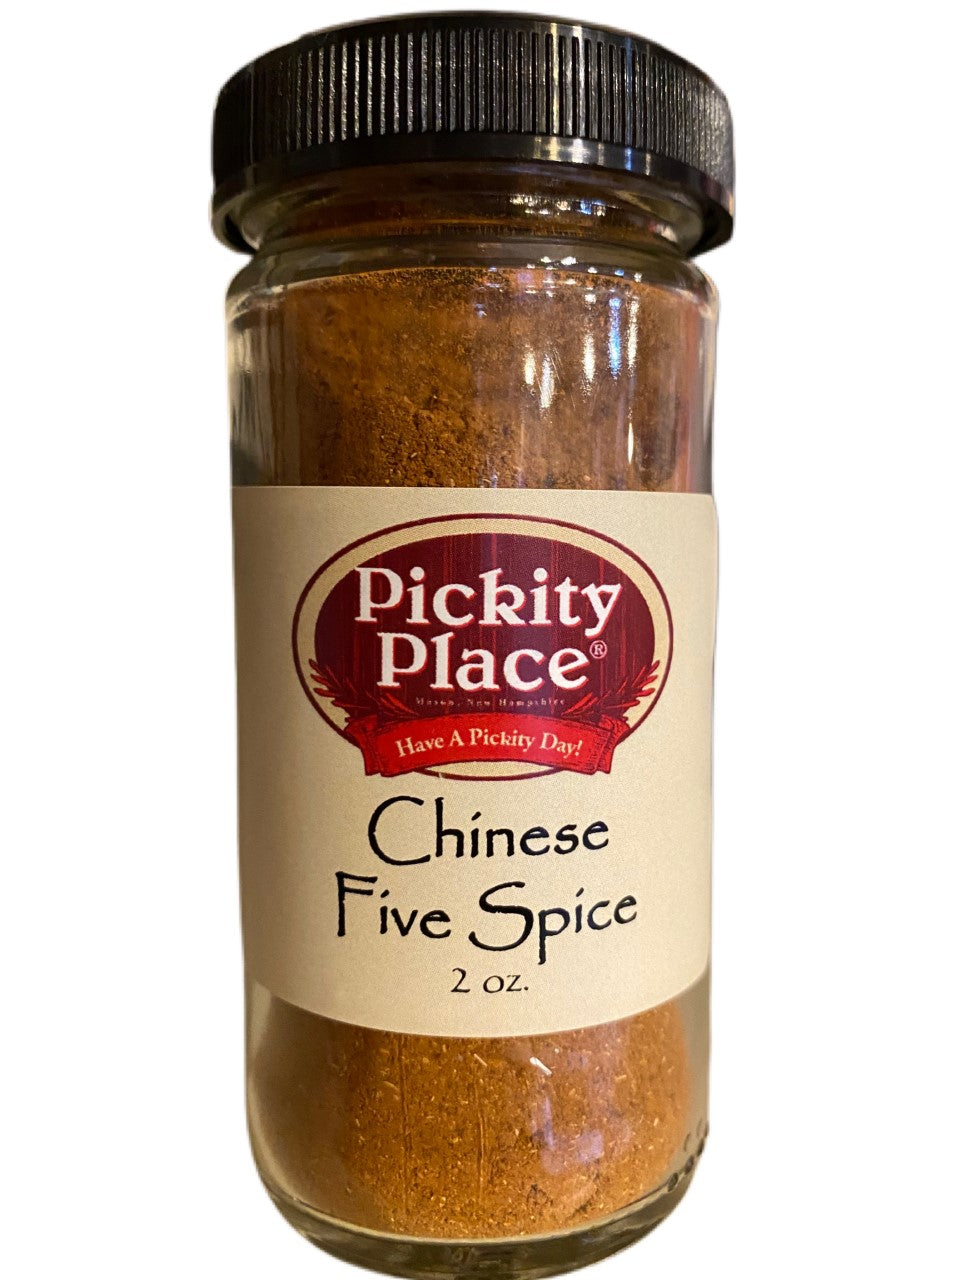 Chinese Five Spice - Oaktown Spice Shop